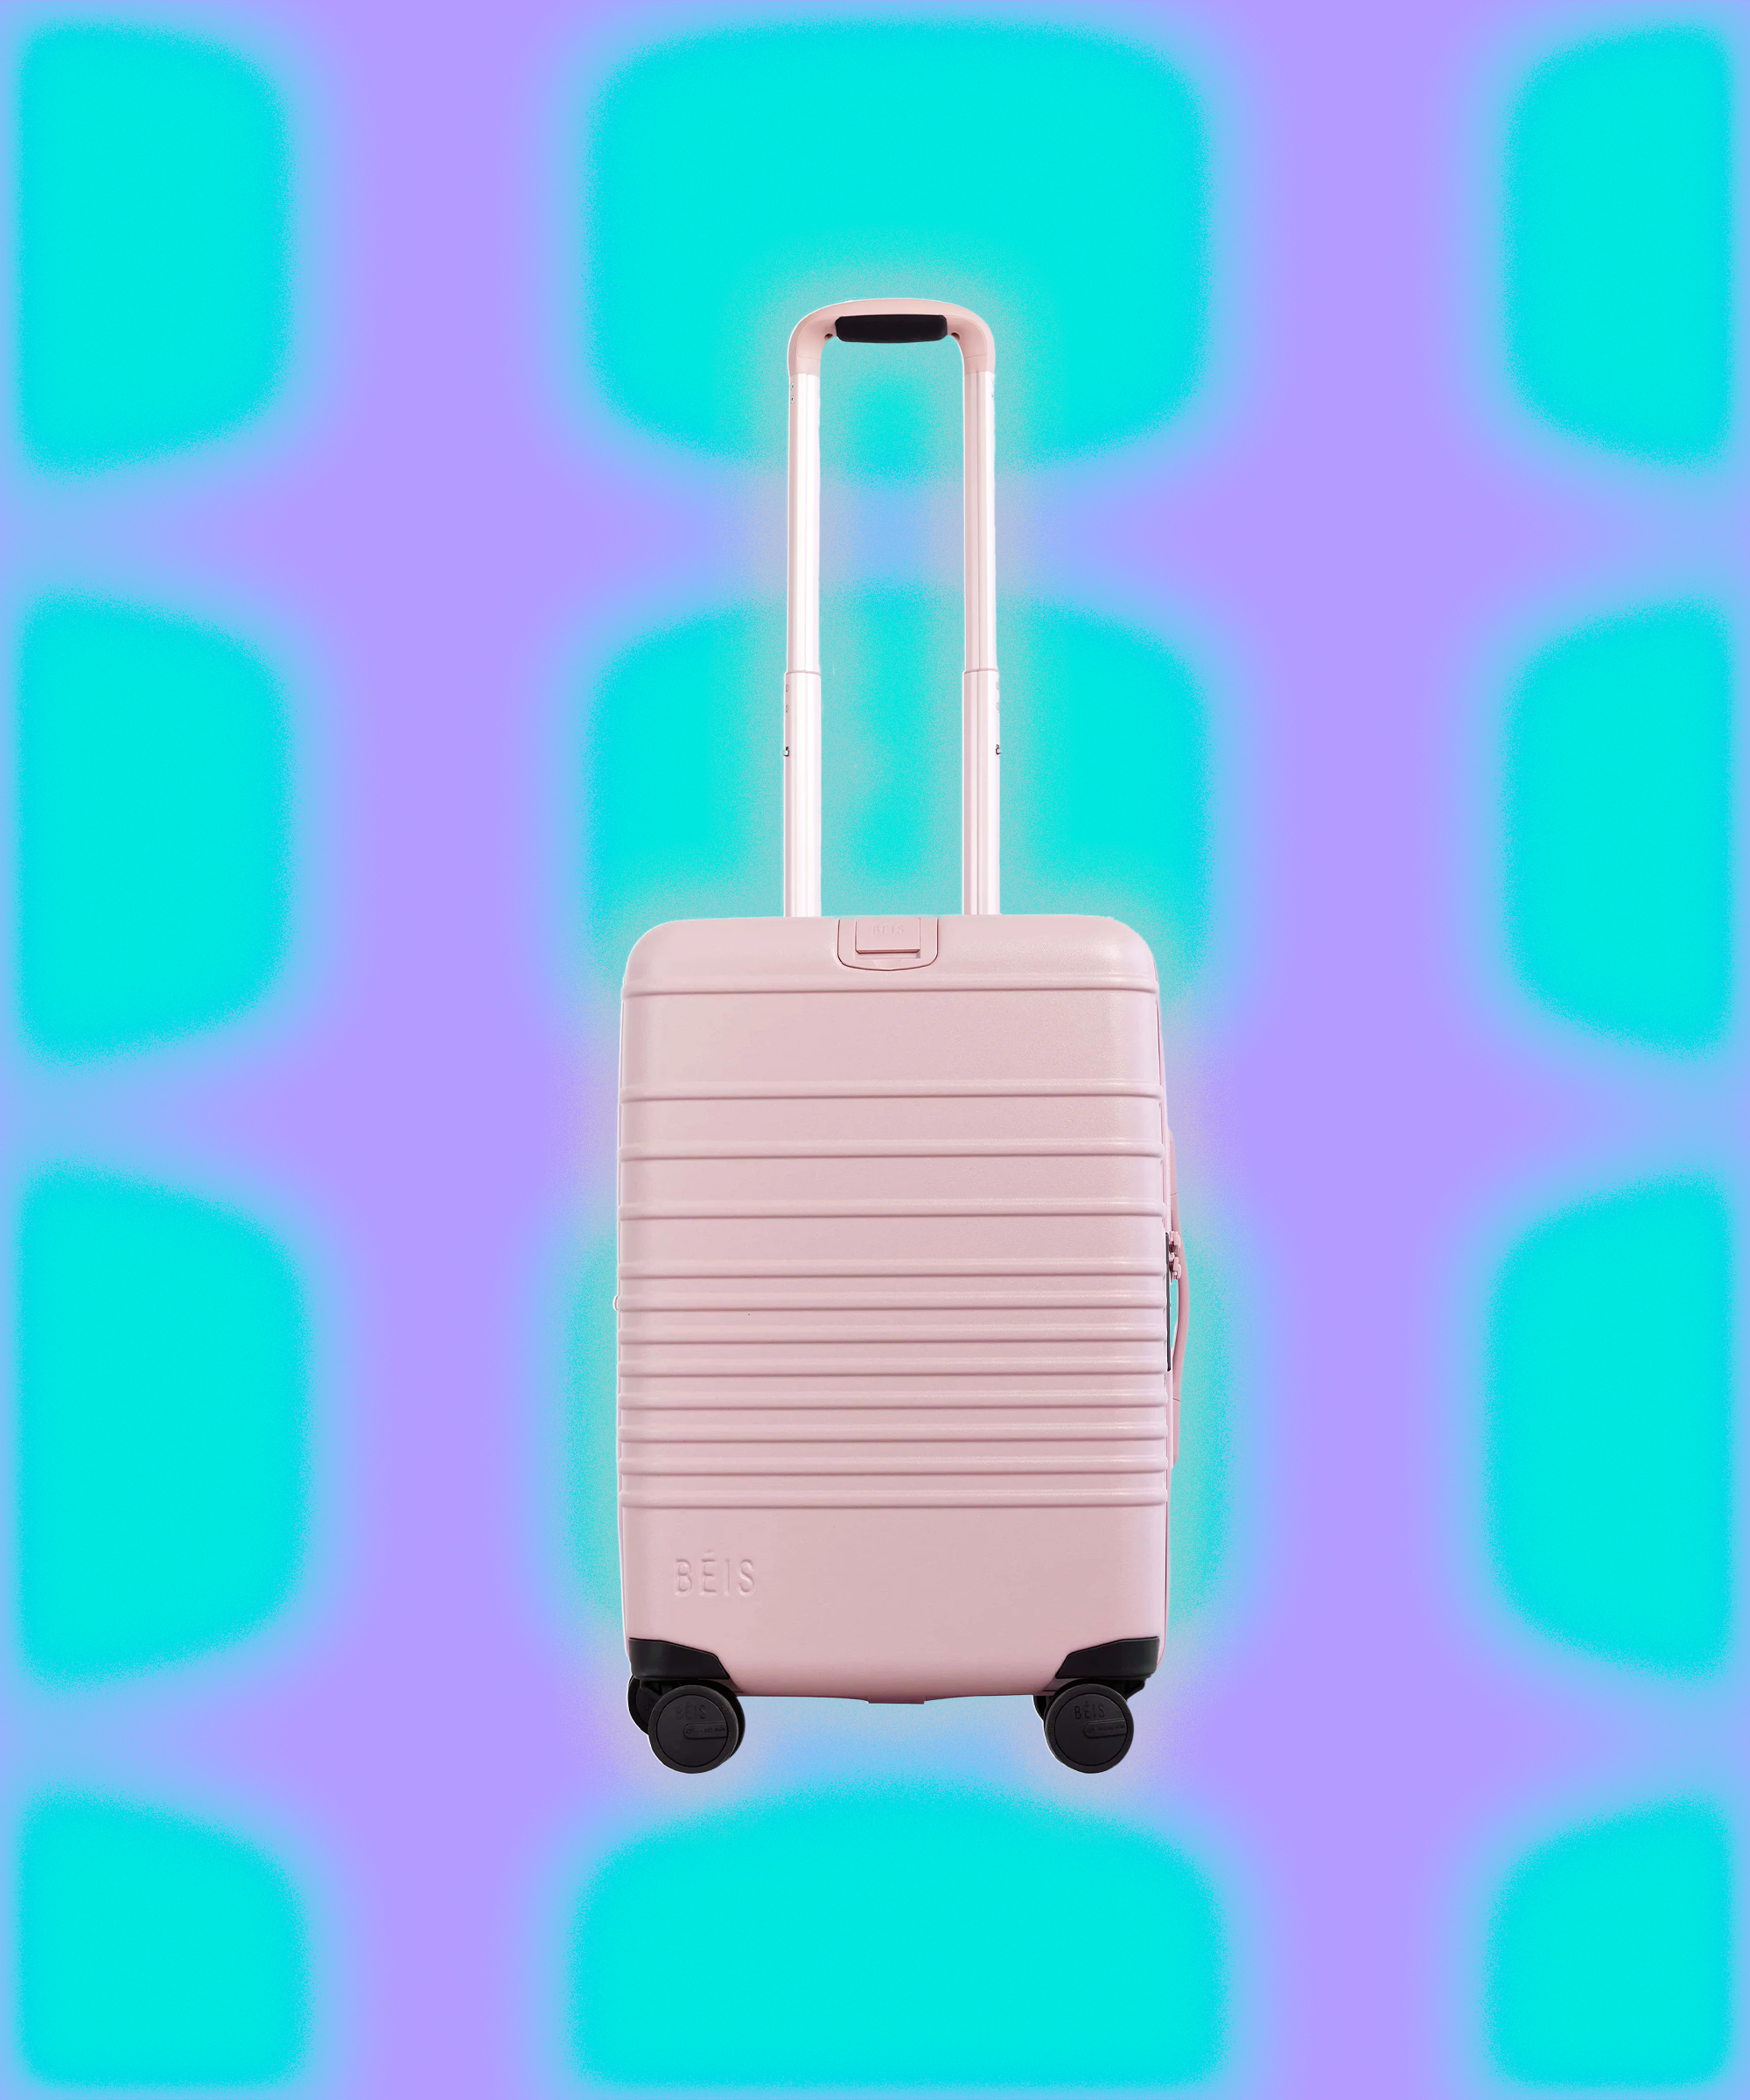 Is the Away Suitcase Awesome or Overhyped?